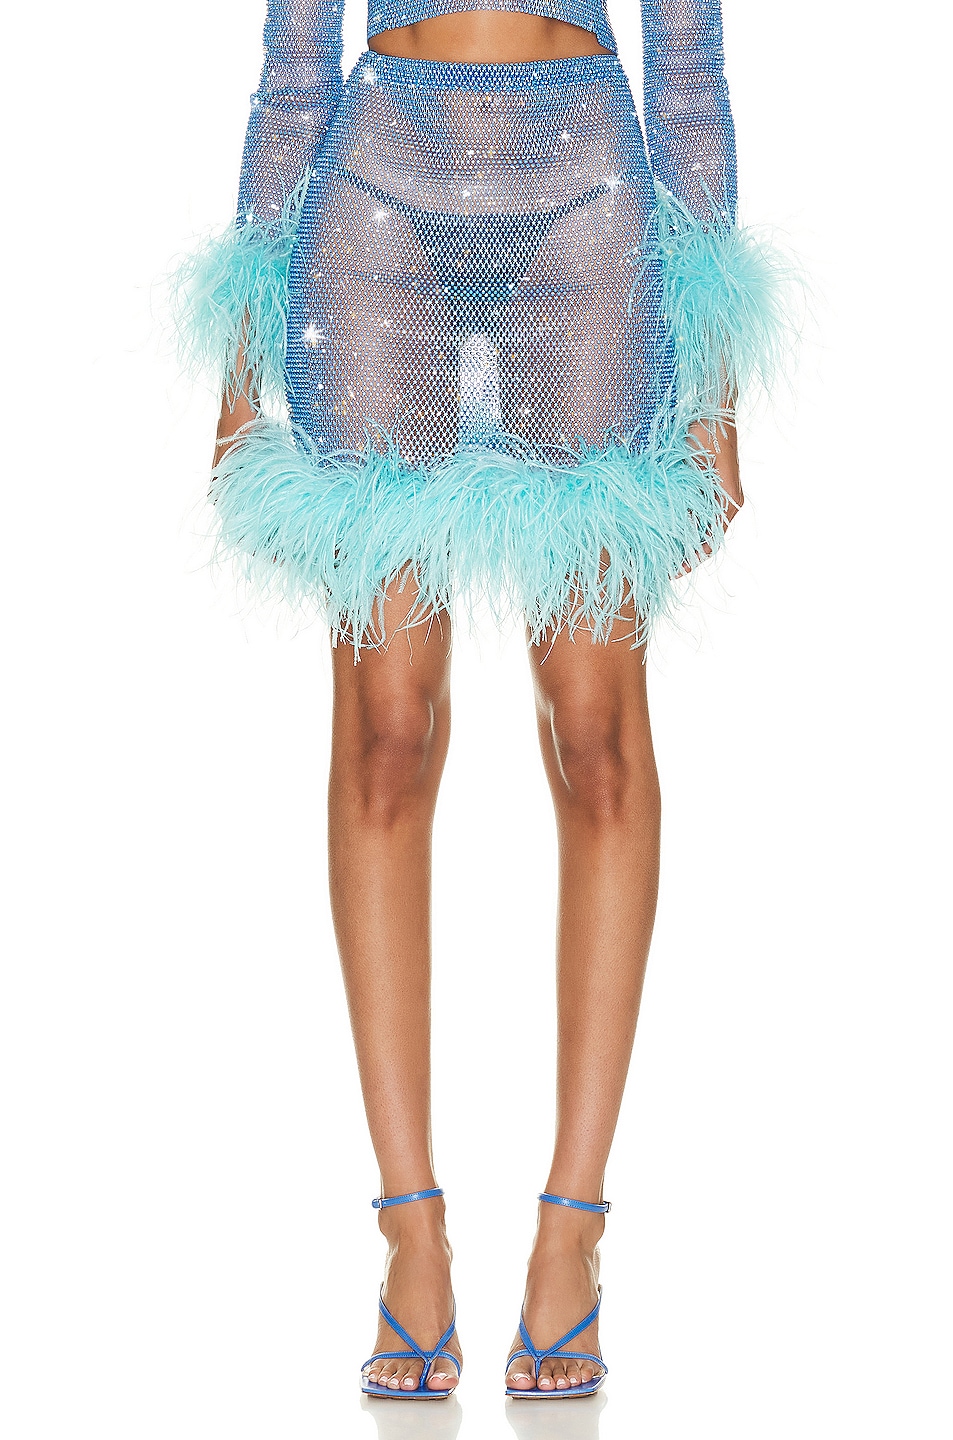 Image 1 of Santa Brands for FWRD Feathers Mini Skirt in Baby Blue